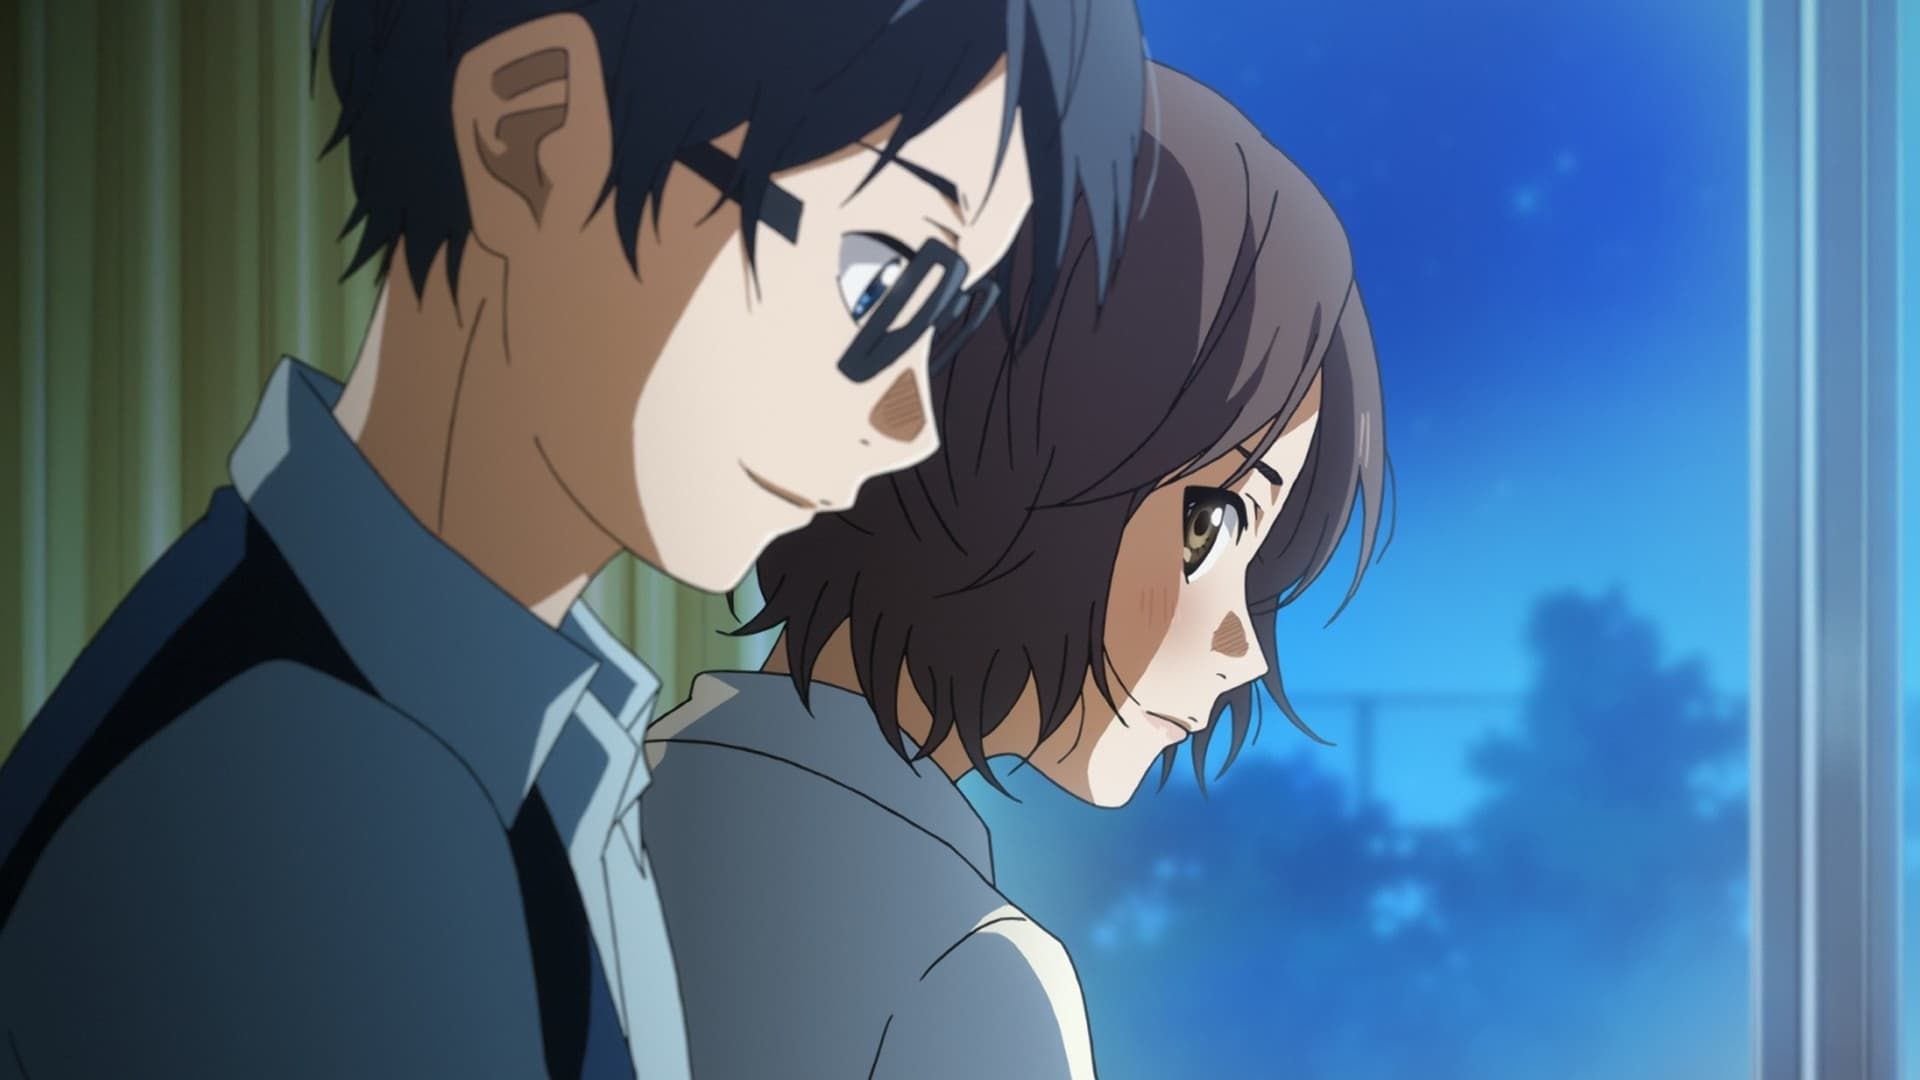 Your Lie in April: Did Arima Kousei end up with Tsubaki Sawabe